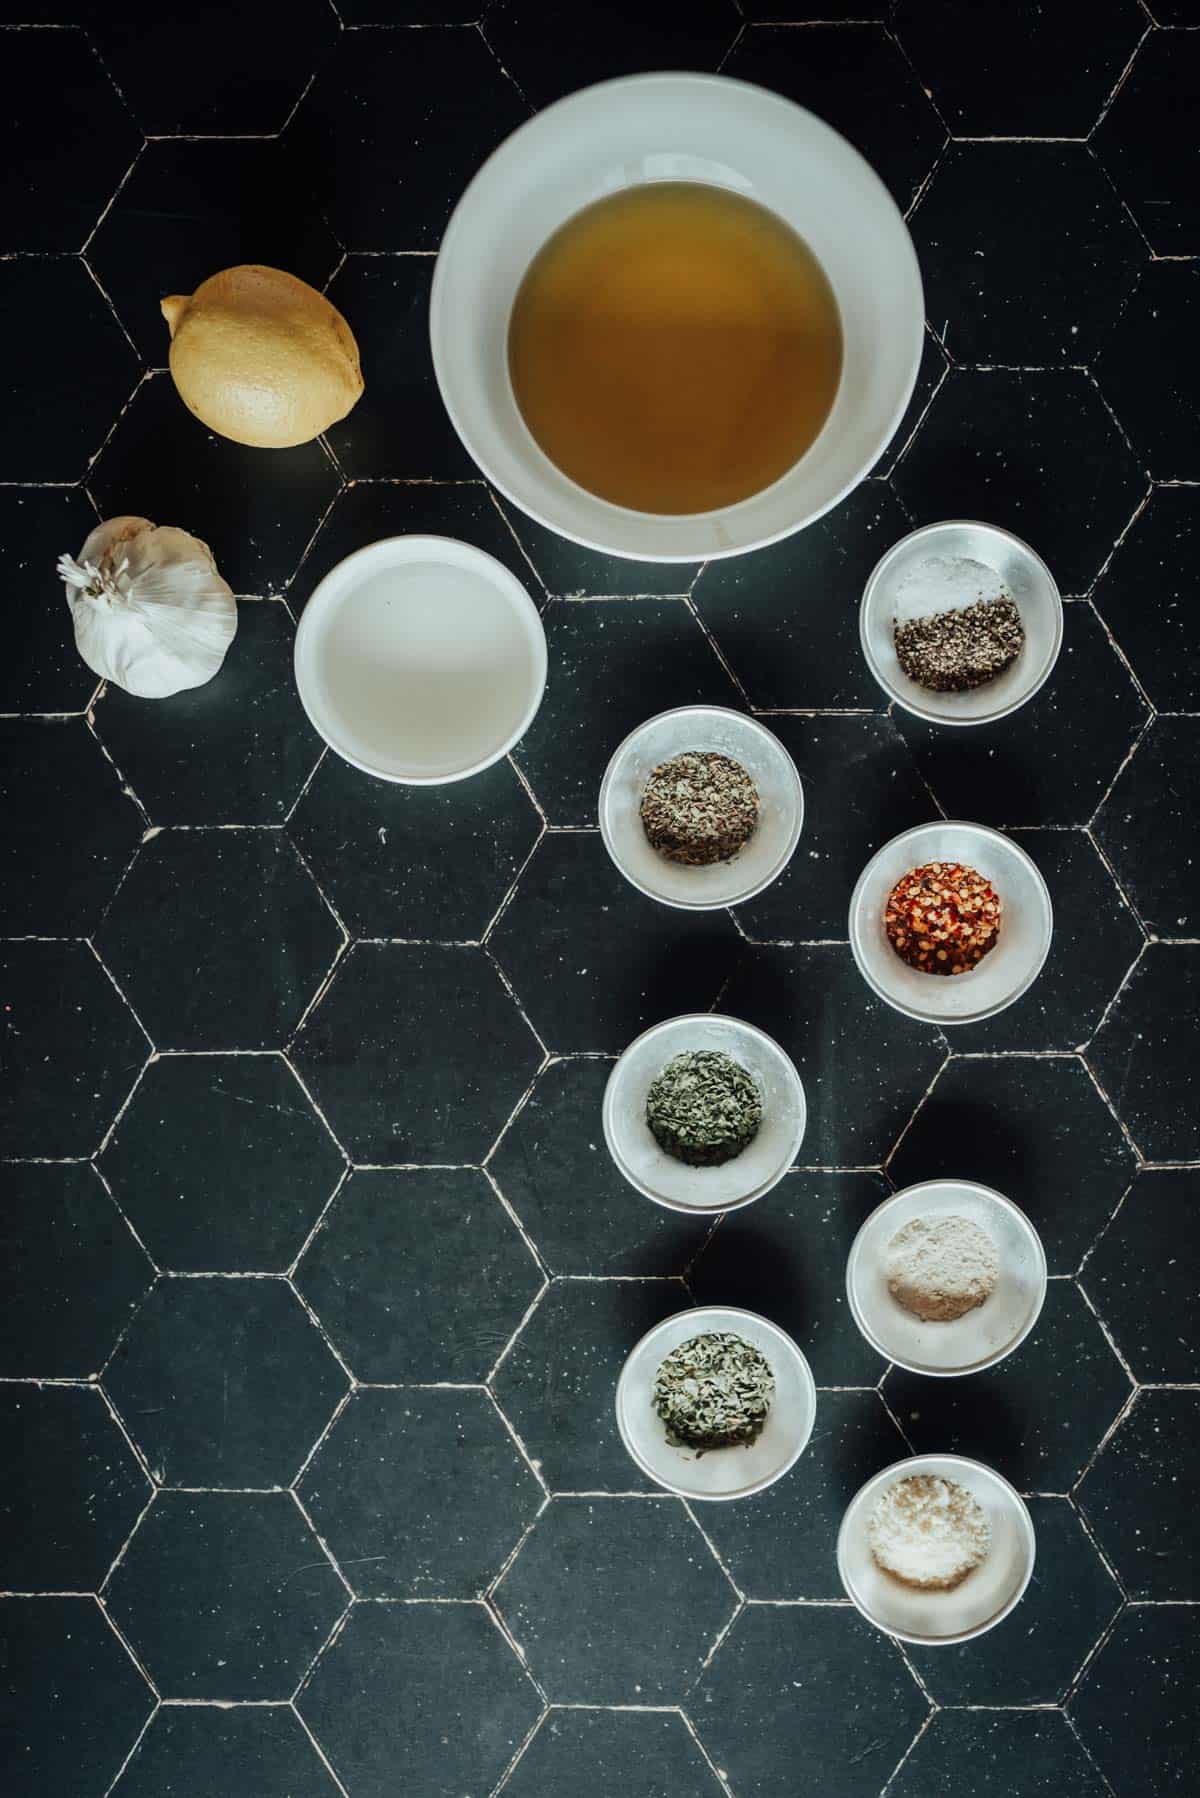 Top view of a variety of ingredients in bowls on a black hexagonal tile surface, including spices, a lemon, garlic, and a bowl of liquid.